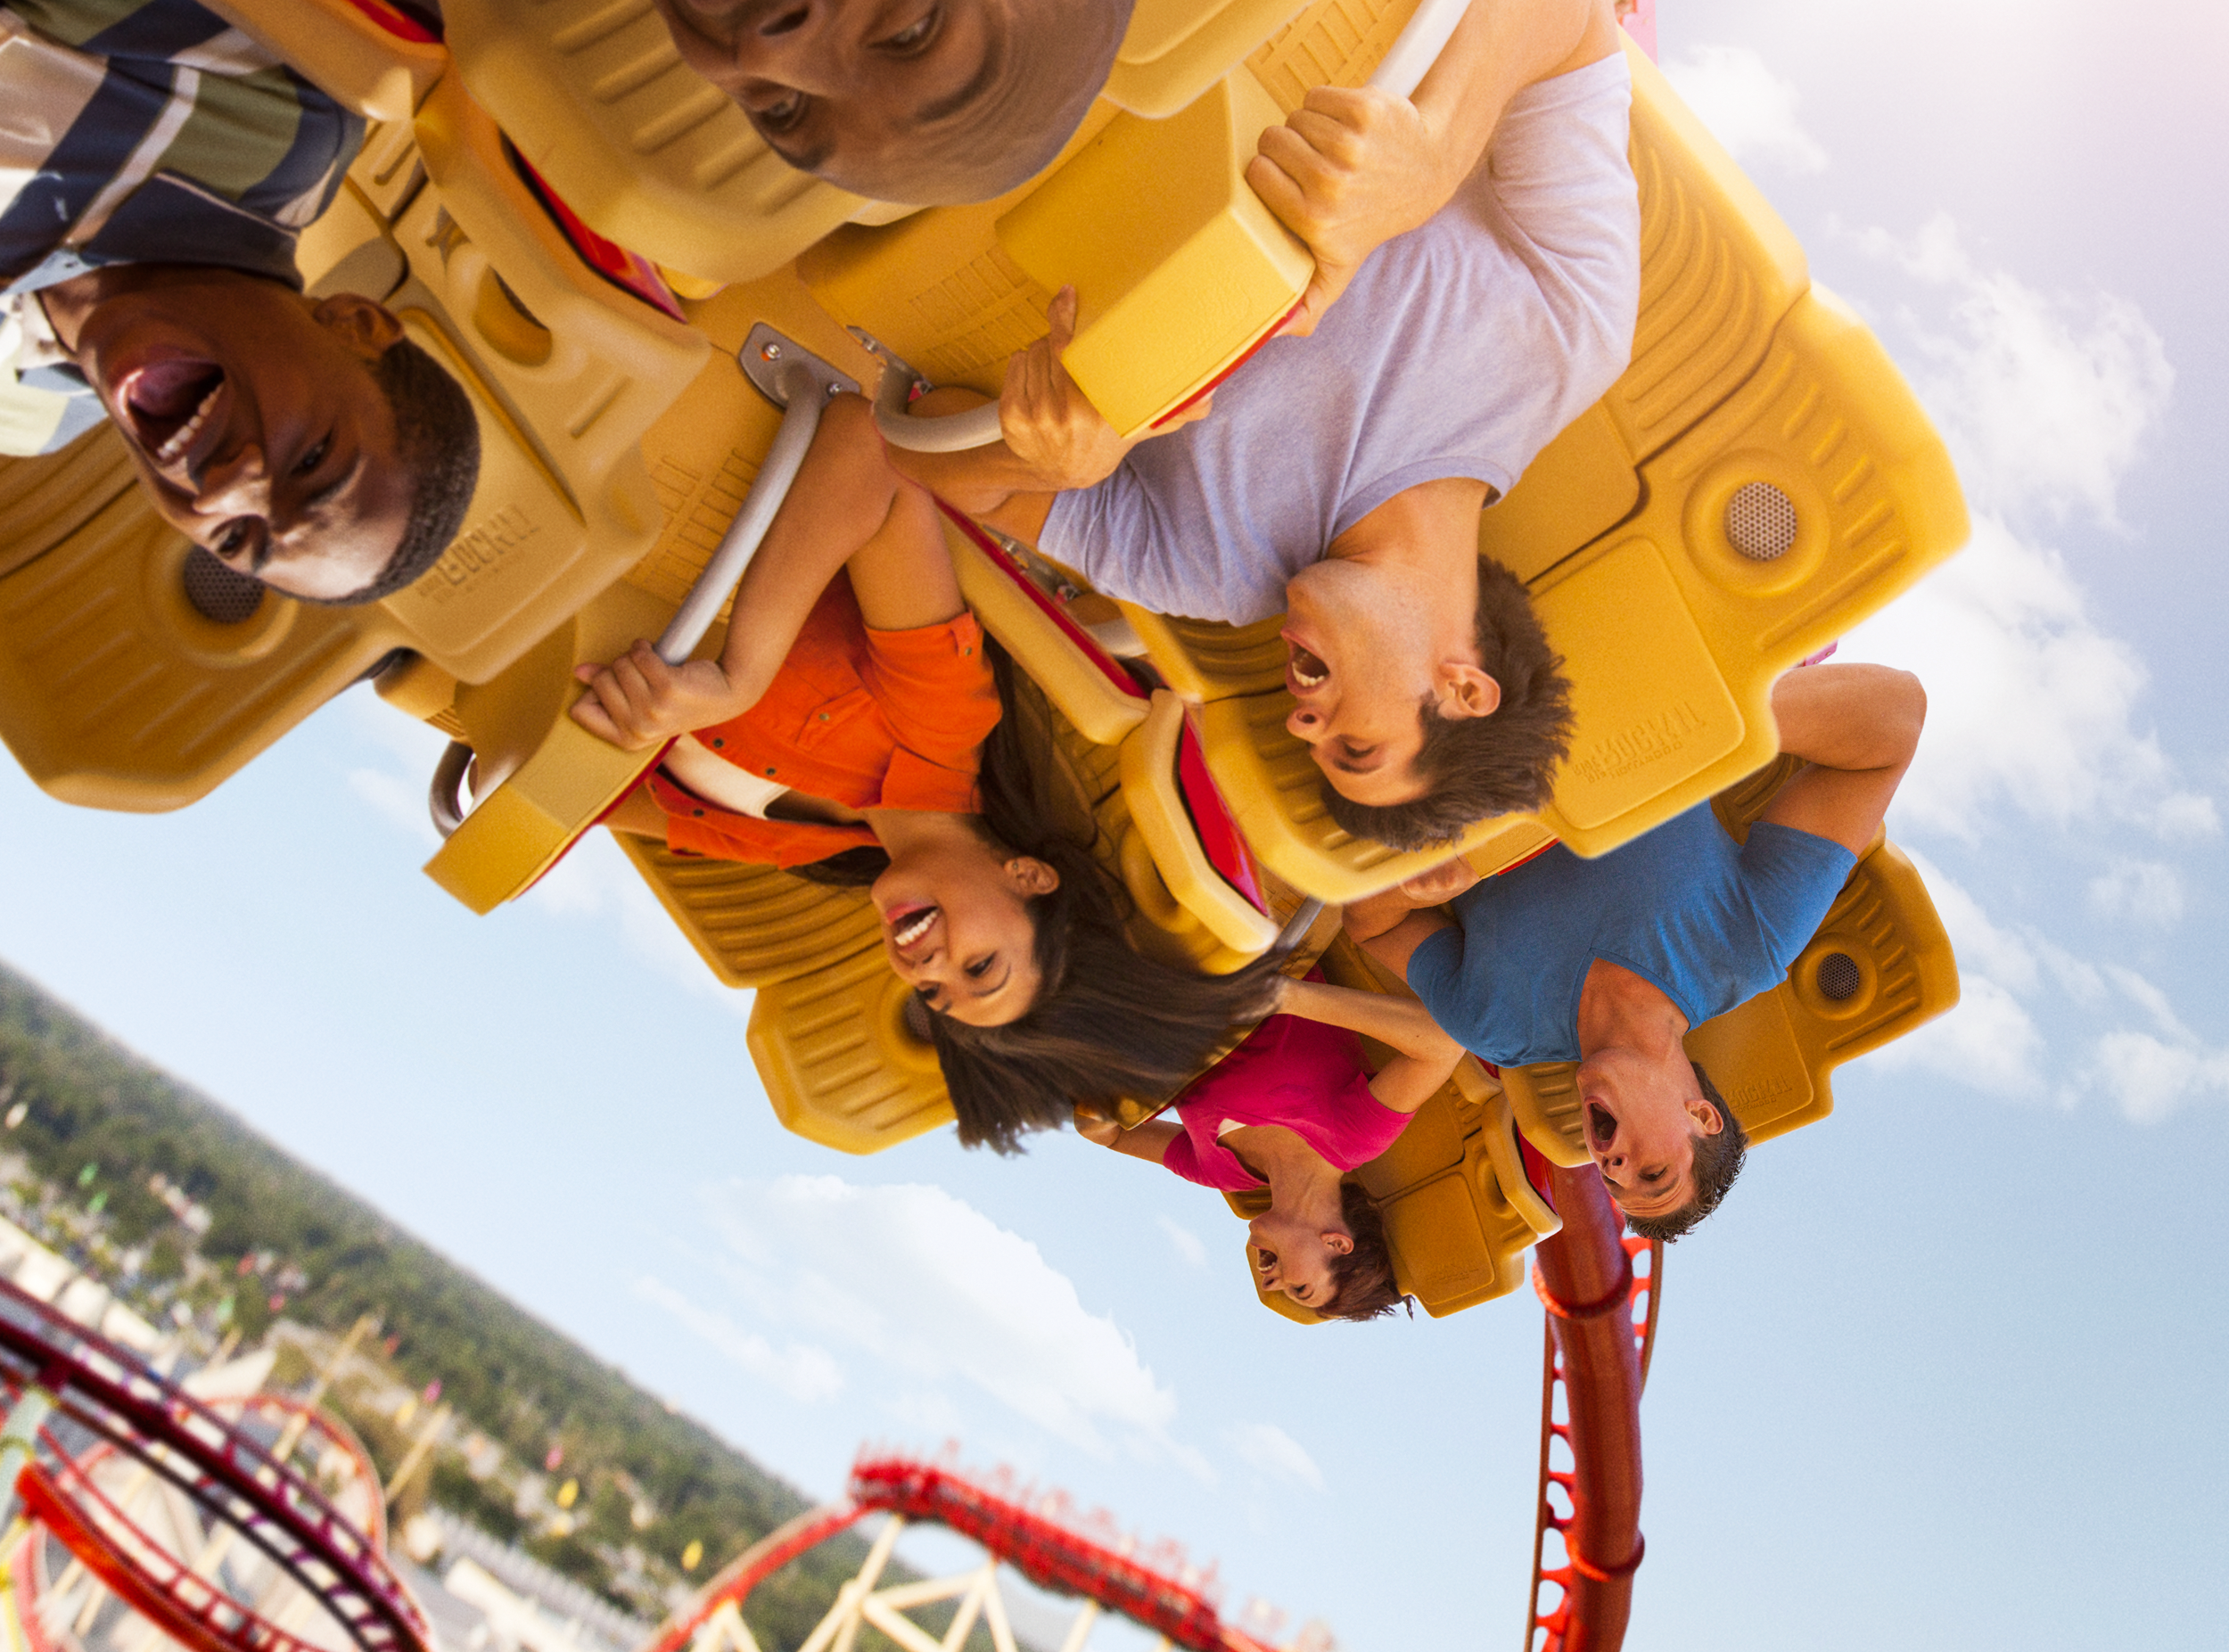 2-Park 3-Day Park-to-Park + 2-Days Free Promo Ticket Dated Adult - Orlando  Informer